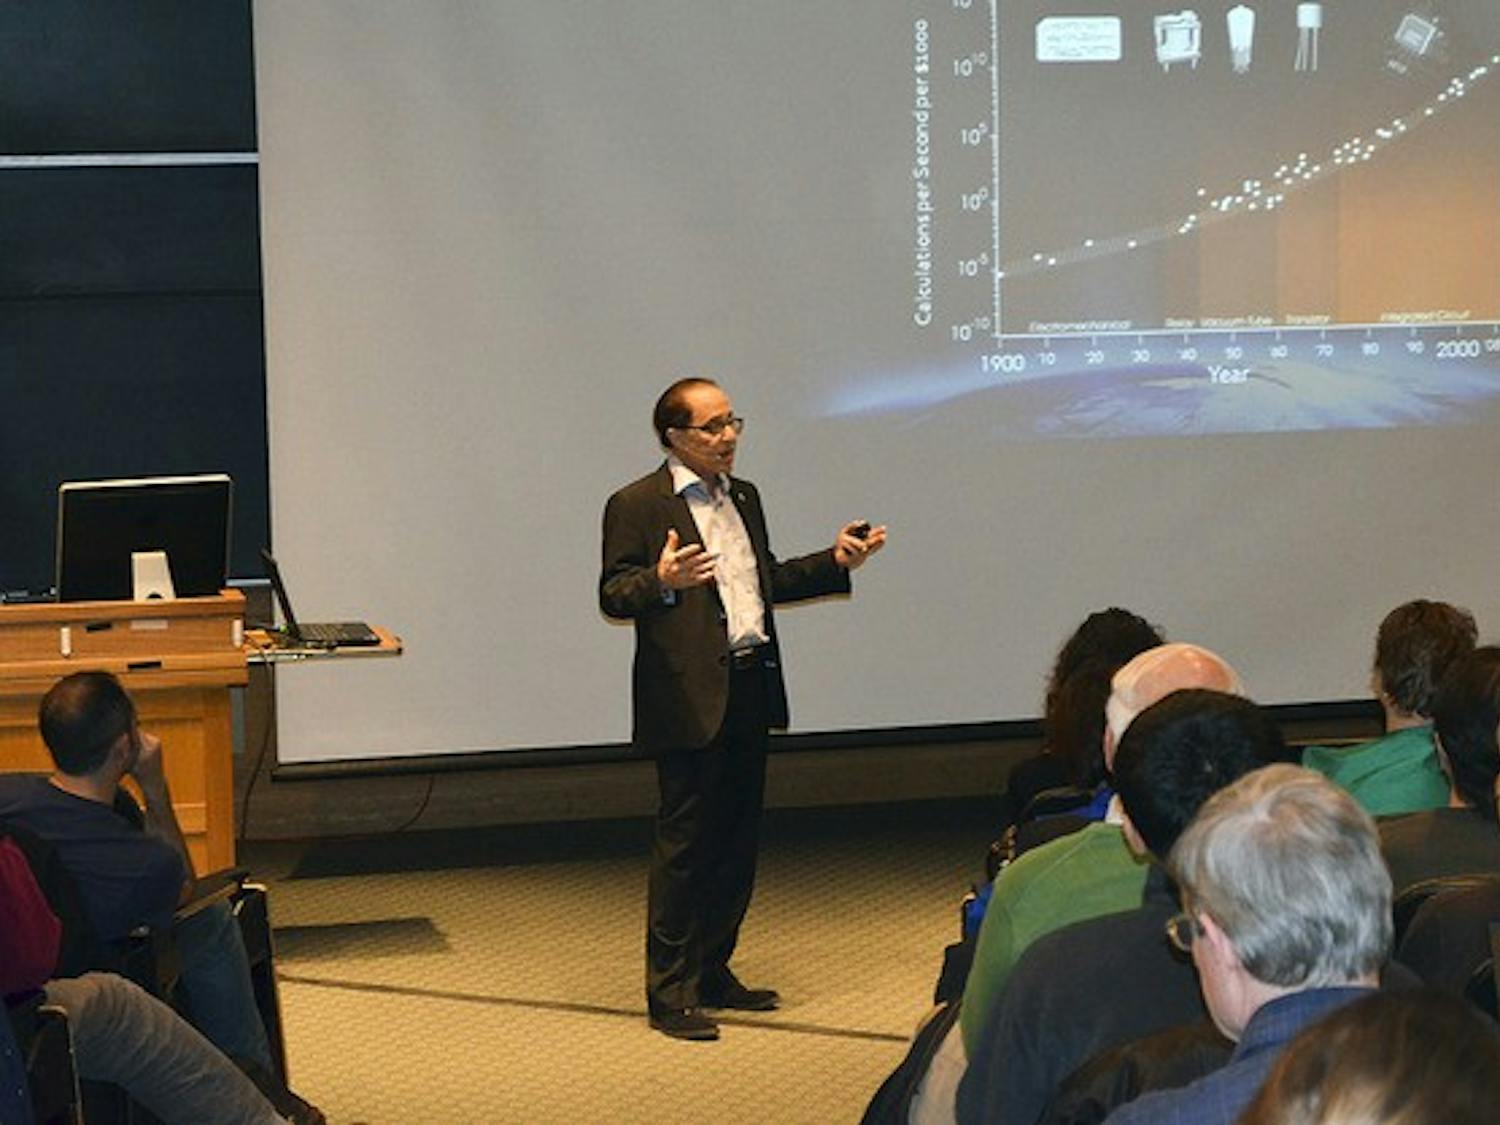 Inventor and founder of Singularity University Ray Kurzweil spoke Thursday about the future of technology and its potential implications for thought and education.